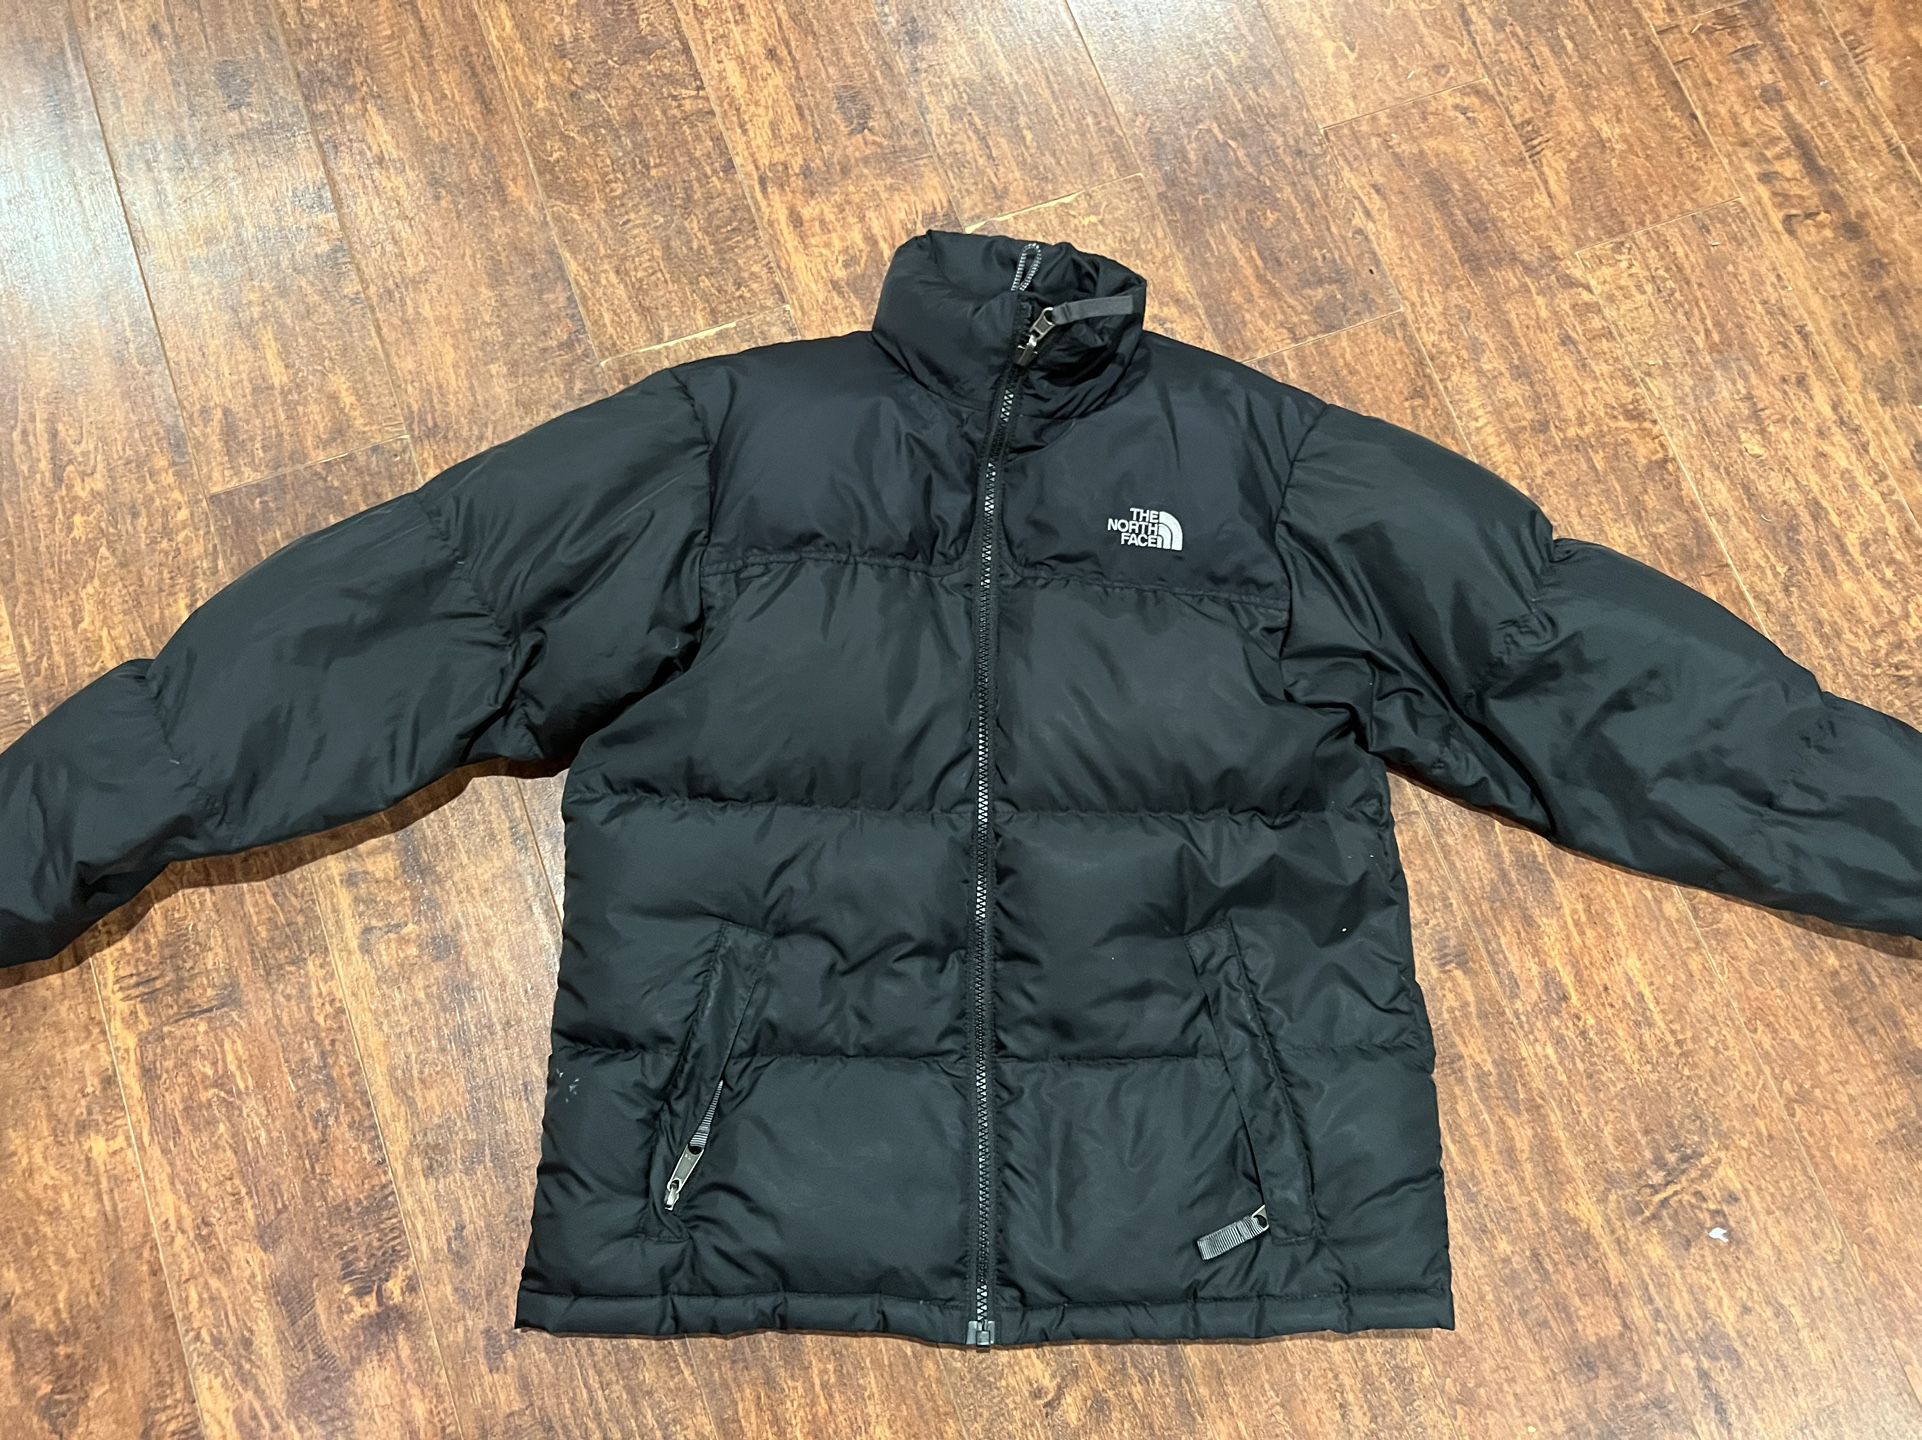 Youth large Black North face Puffer Jacket 